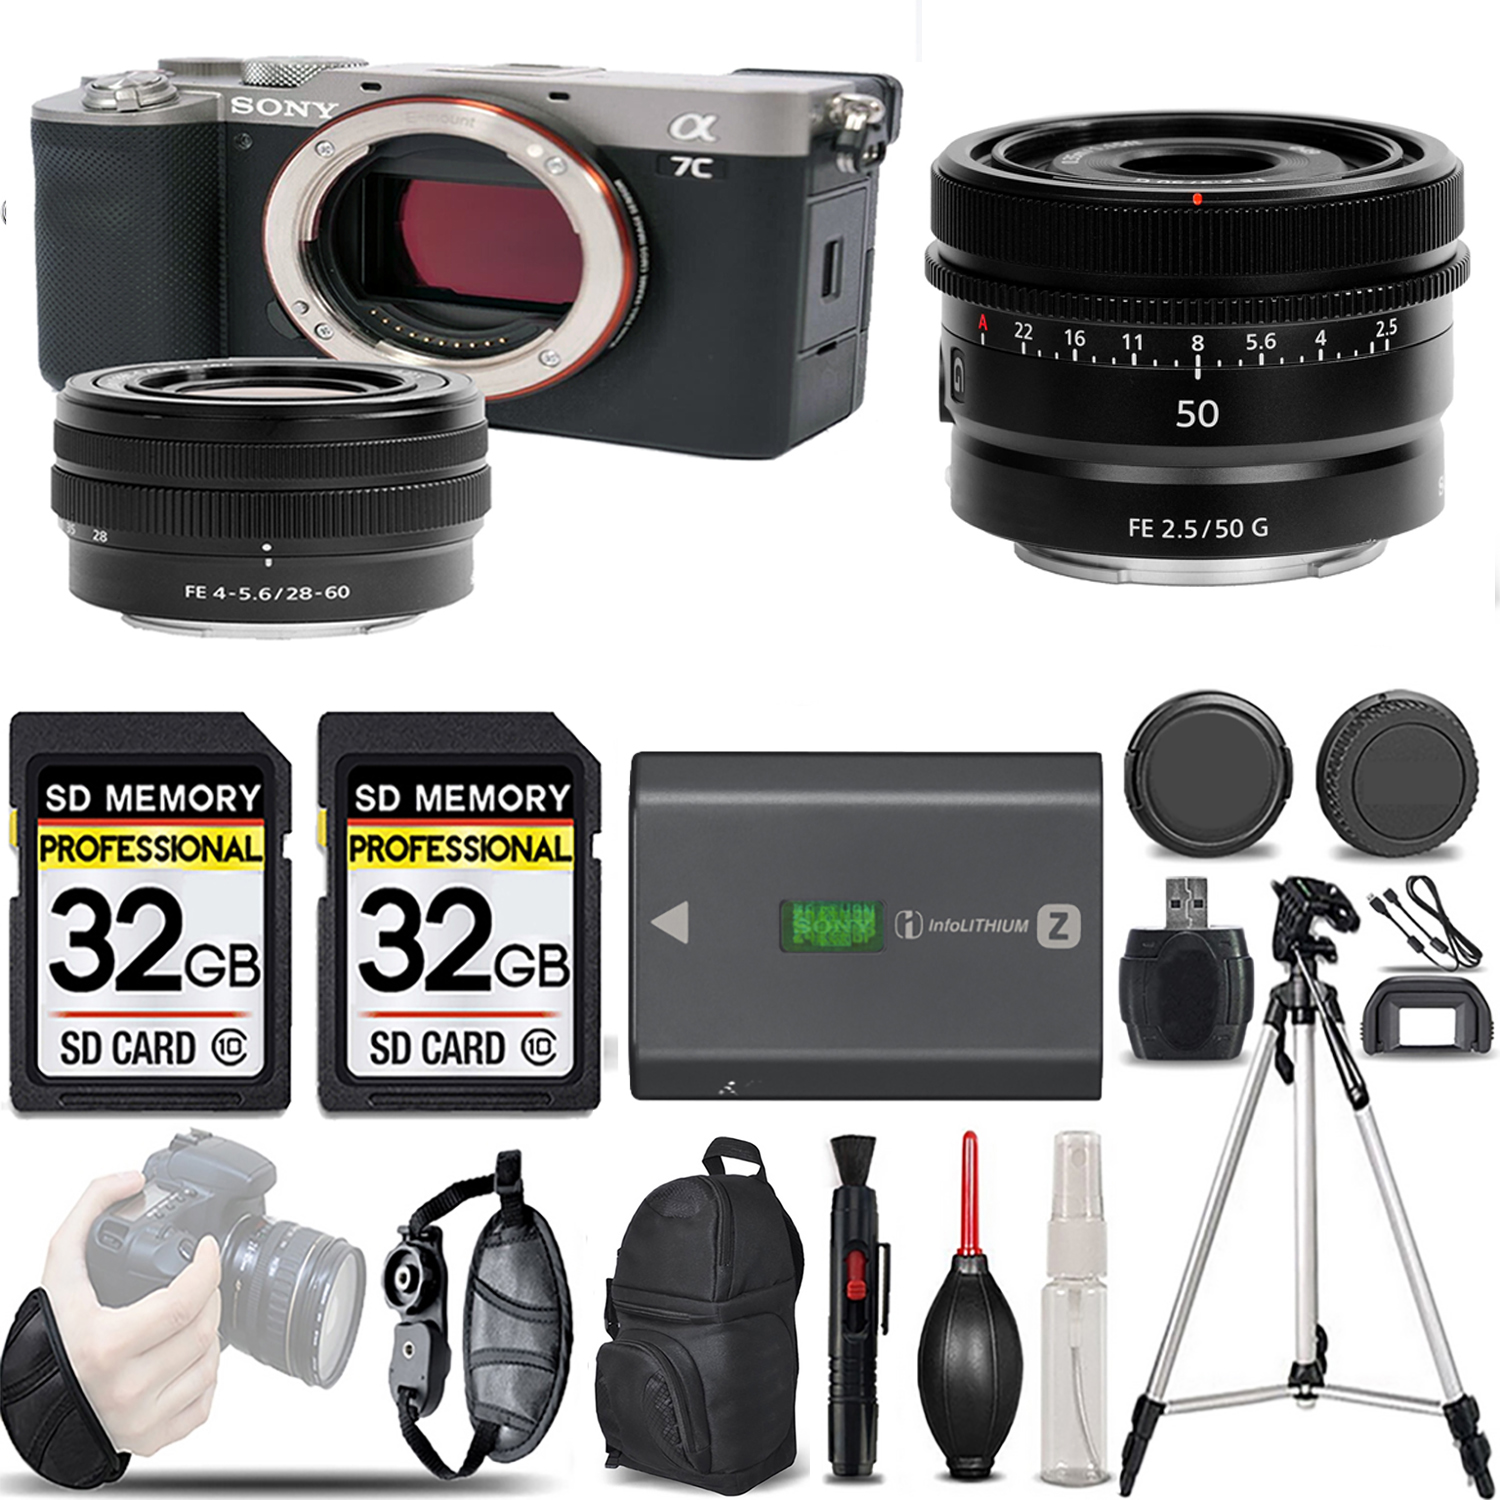 Alpha a7C Mirrorless Camera (Silver) + 28-60mm Lens + 50mm Lens - LOADED KIT *FREE SHIPPING*